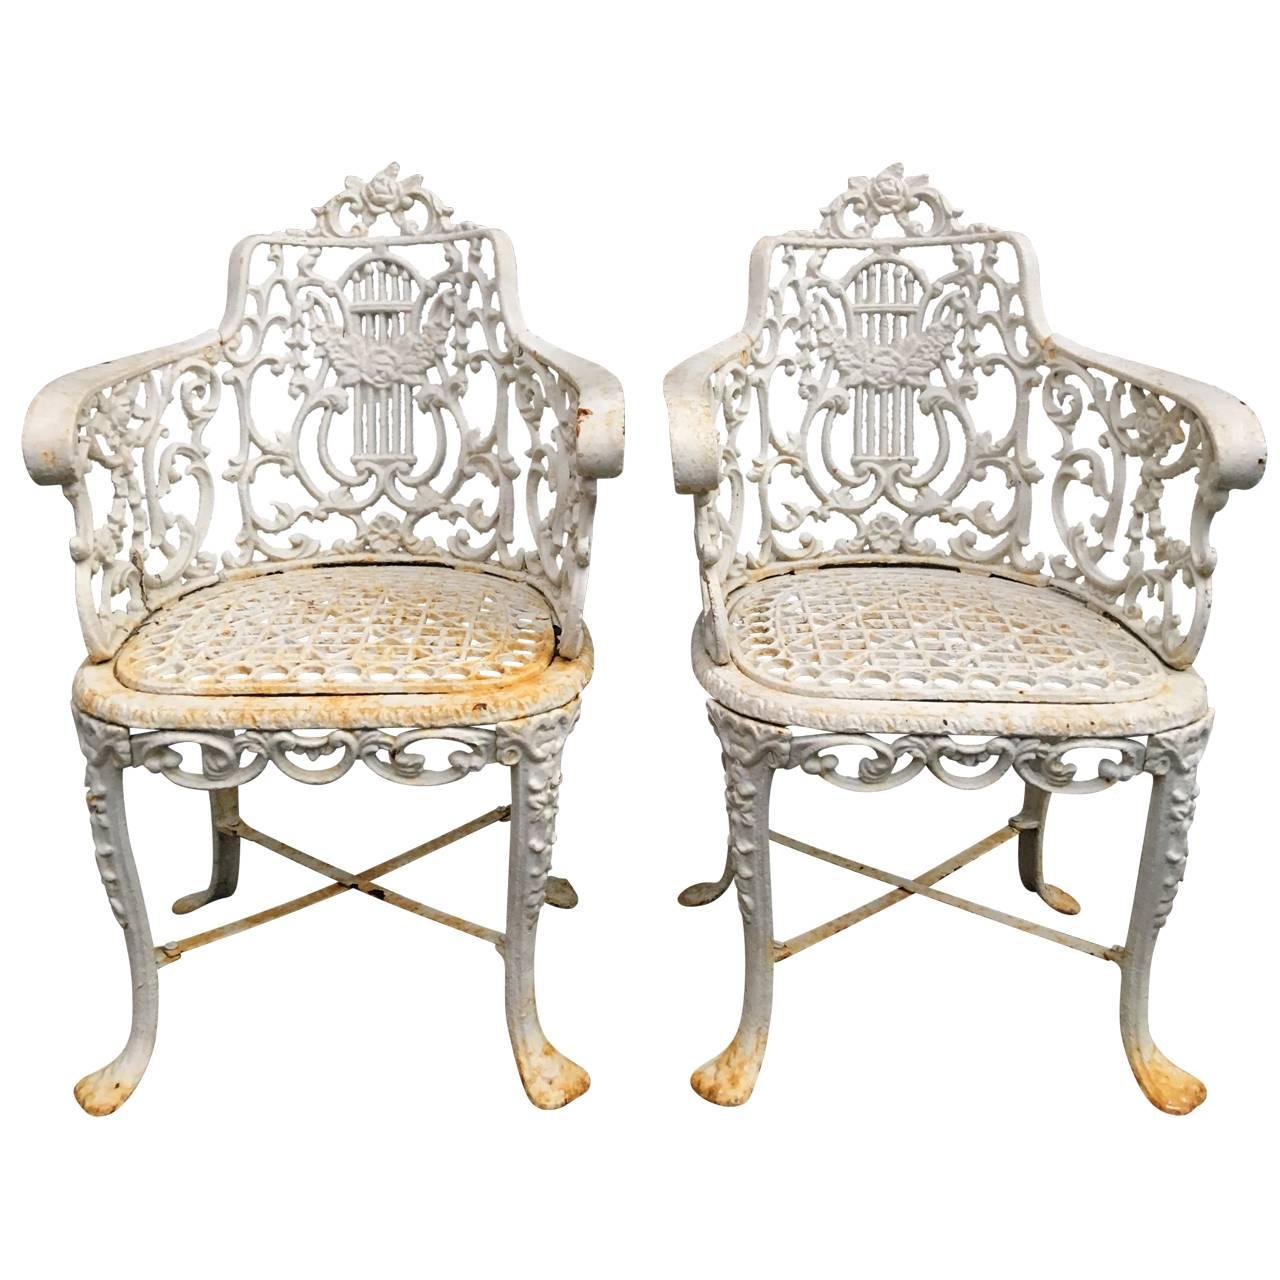 Pair Of Early Cast Iron Patio Armchairs, Robert Wood Foundry